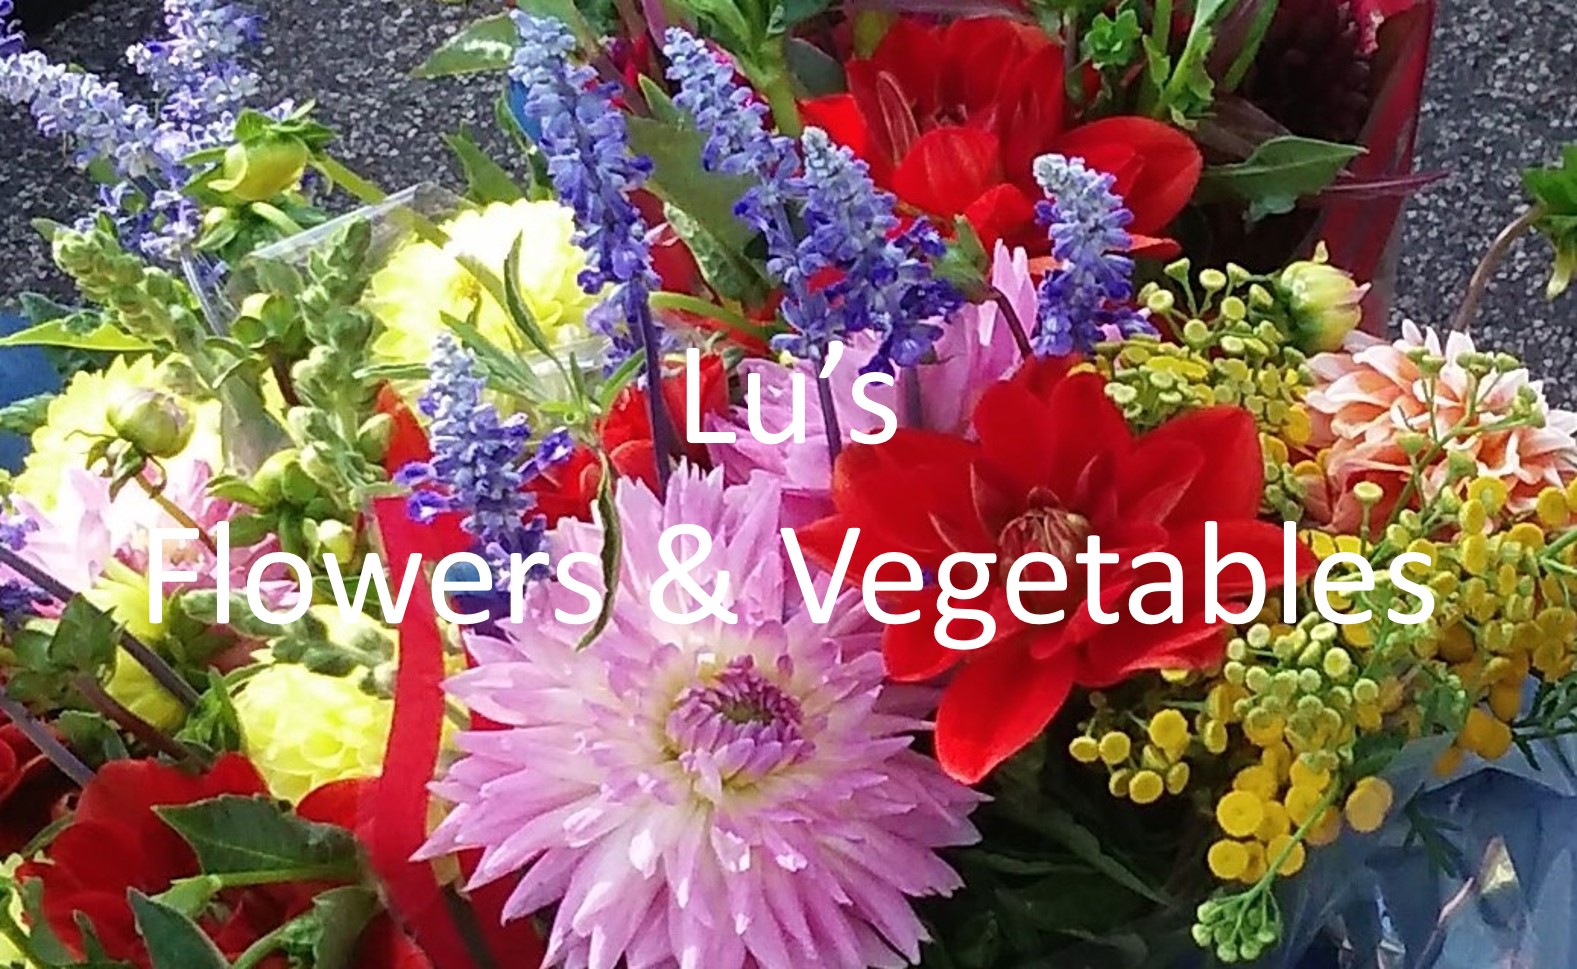 Lu's Flowers and Vegetables  Logo